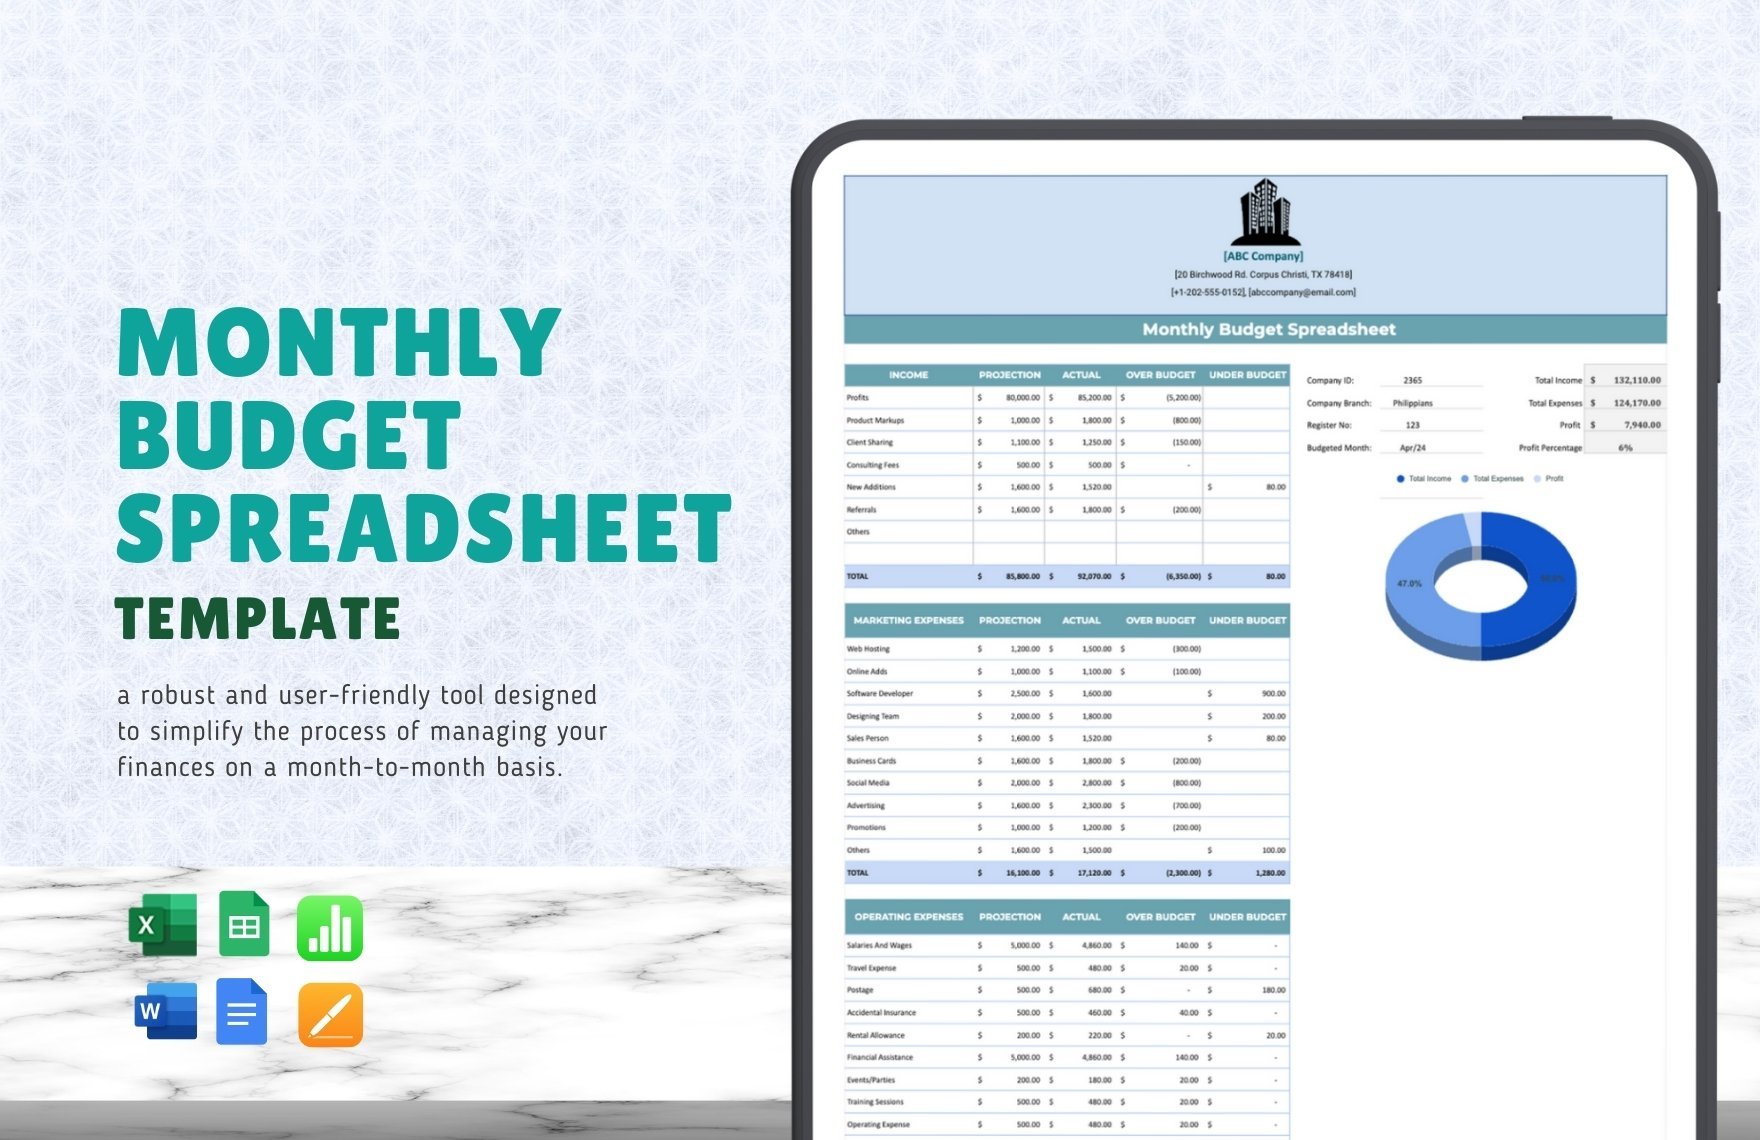 Monthly Budget Spreadsheet Template in Word, Google Docs, Excel, Google Sheets, Apple Pages, Apple Numbers